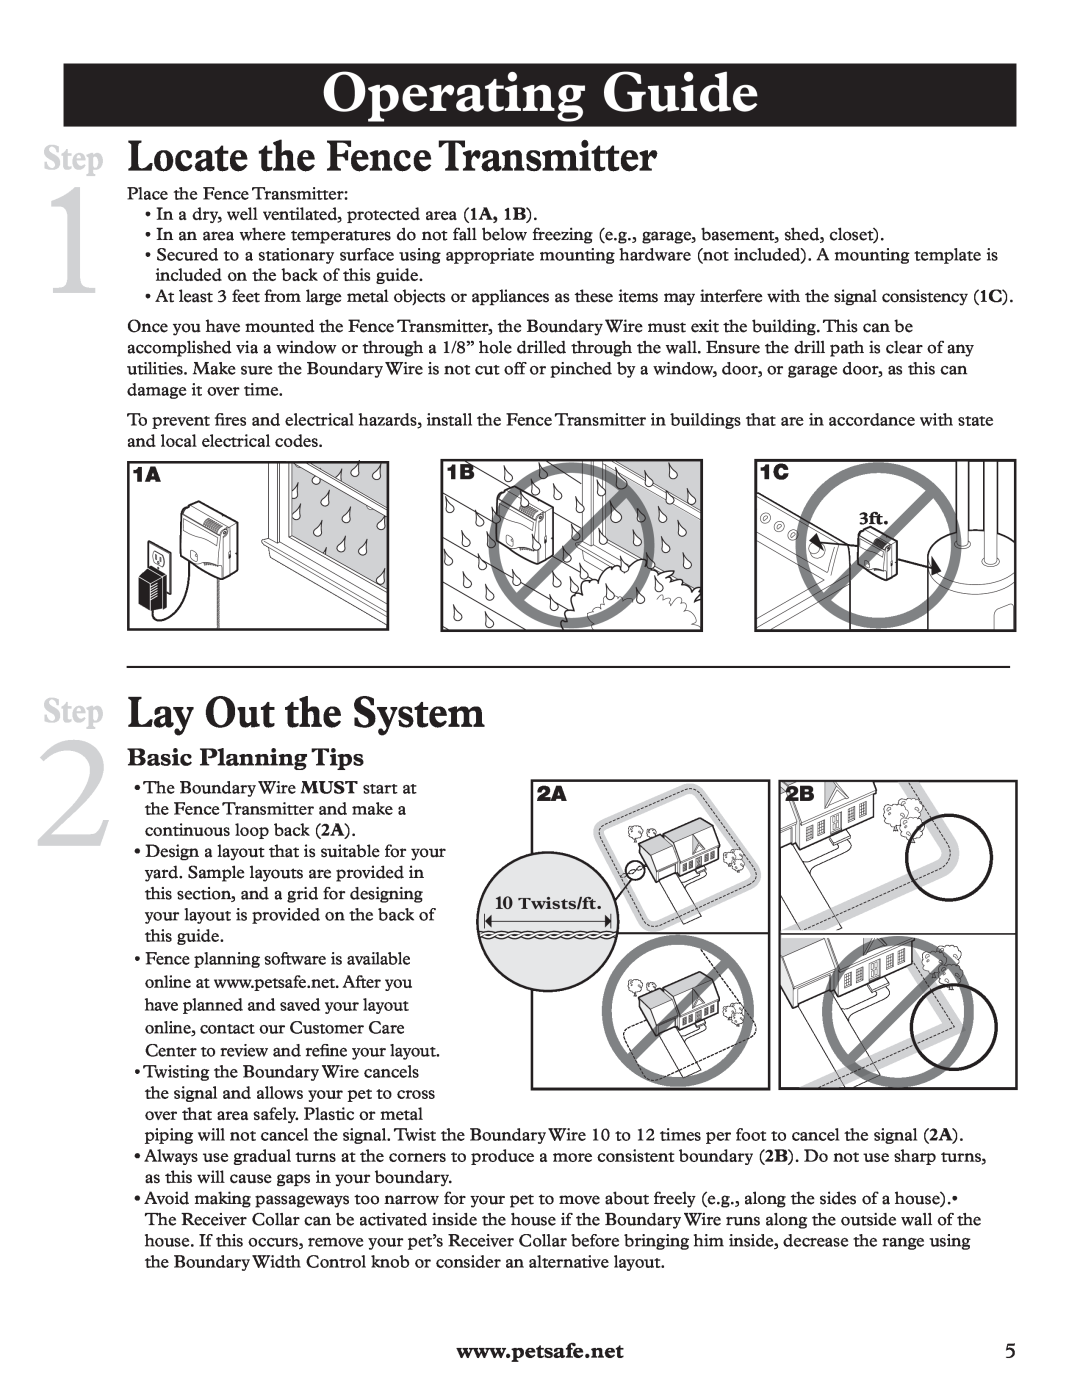 Petsafe RFA-200 Operating Guide, Step Locate the Fence Transmitter, Lay Out the System, Basic Planning Tips, Twists/ft 